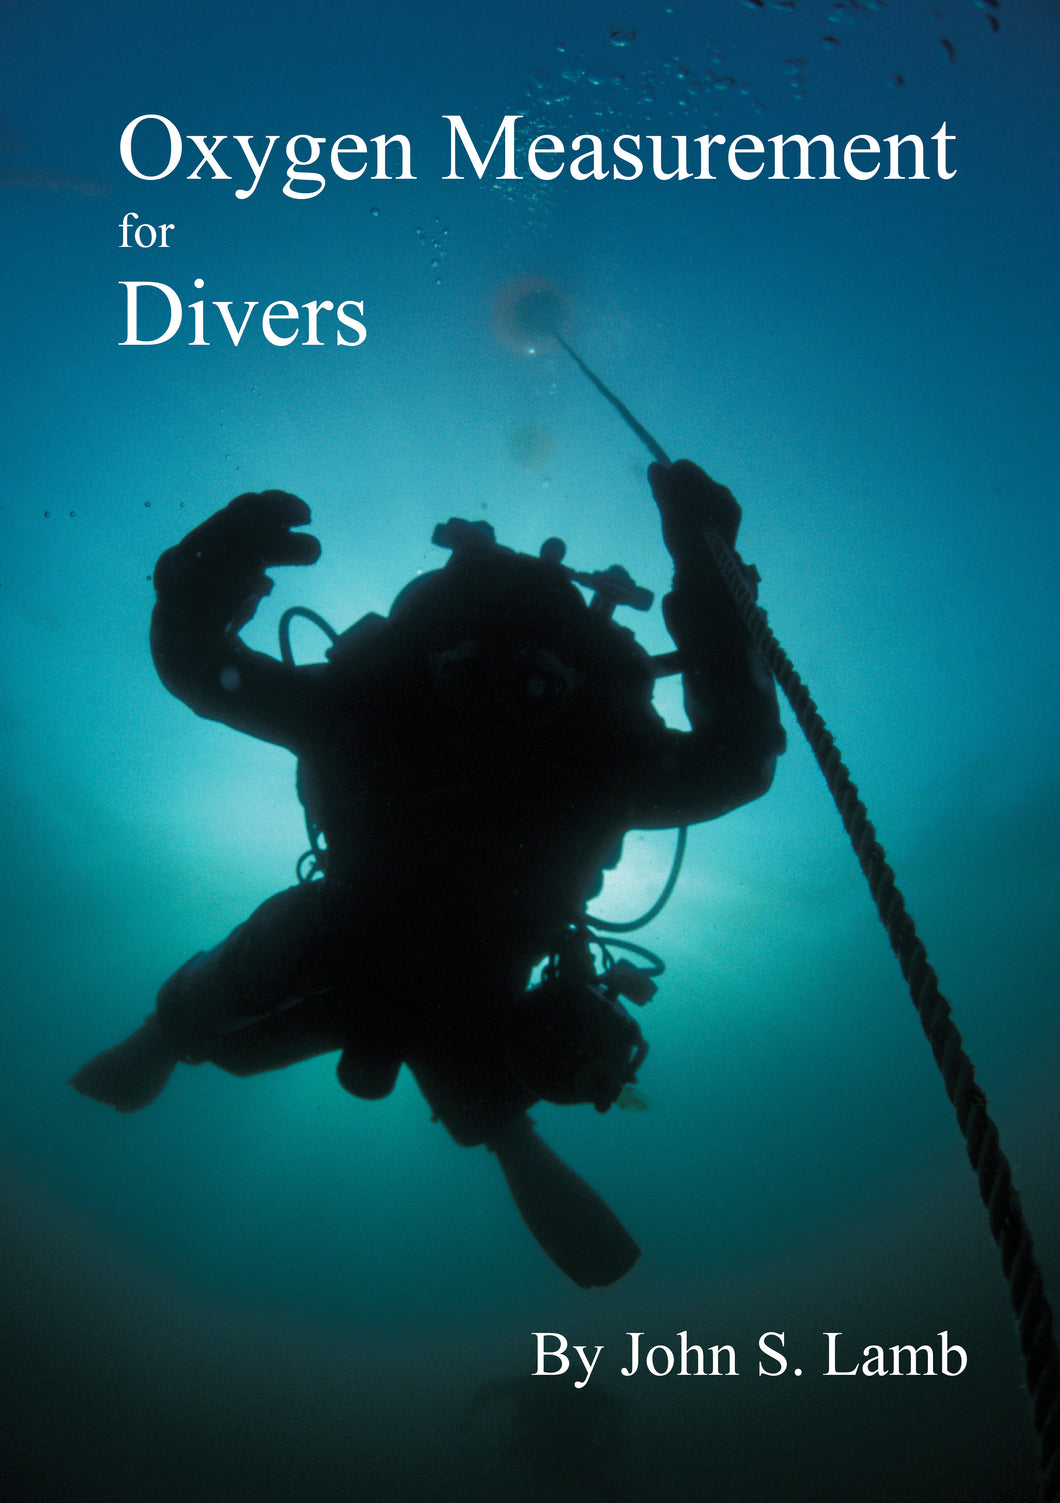 Oxygen Measurement for Divers Book 2nd Edition (9790002)